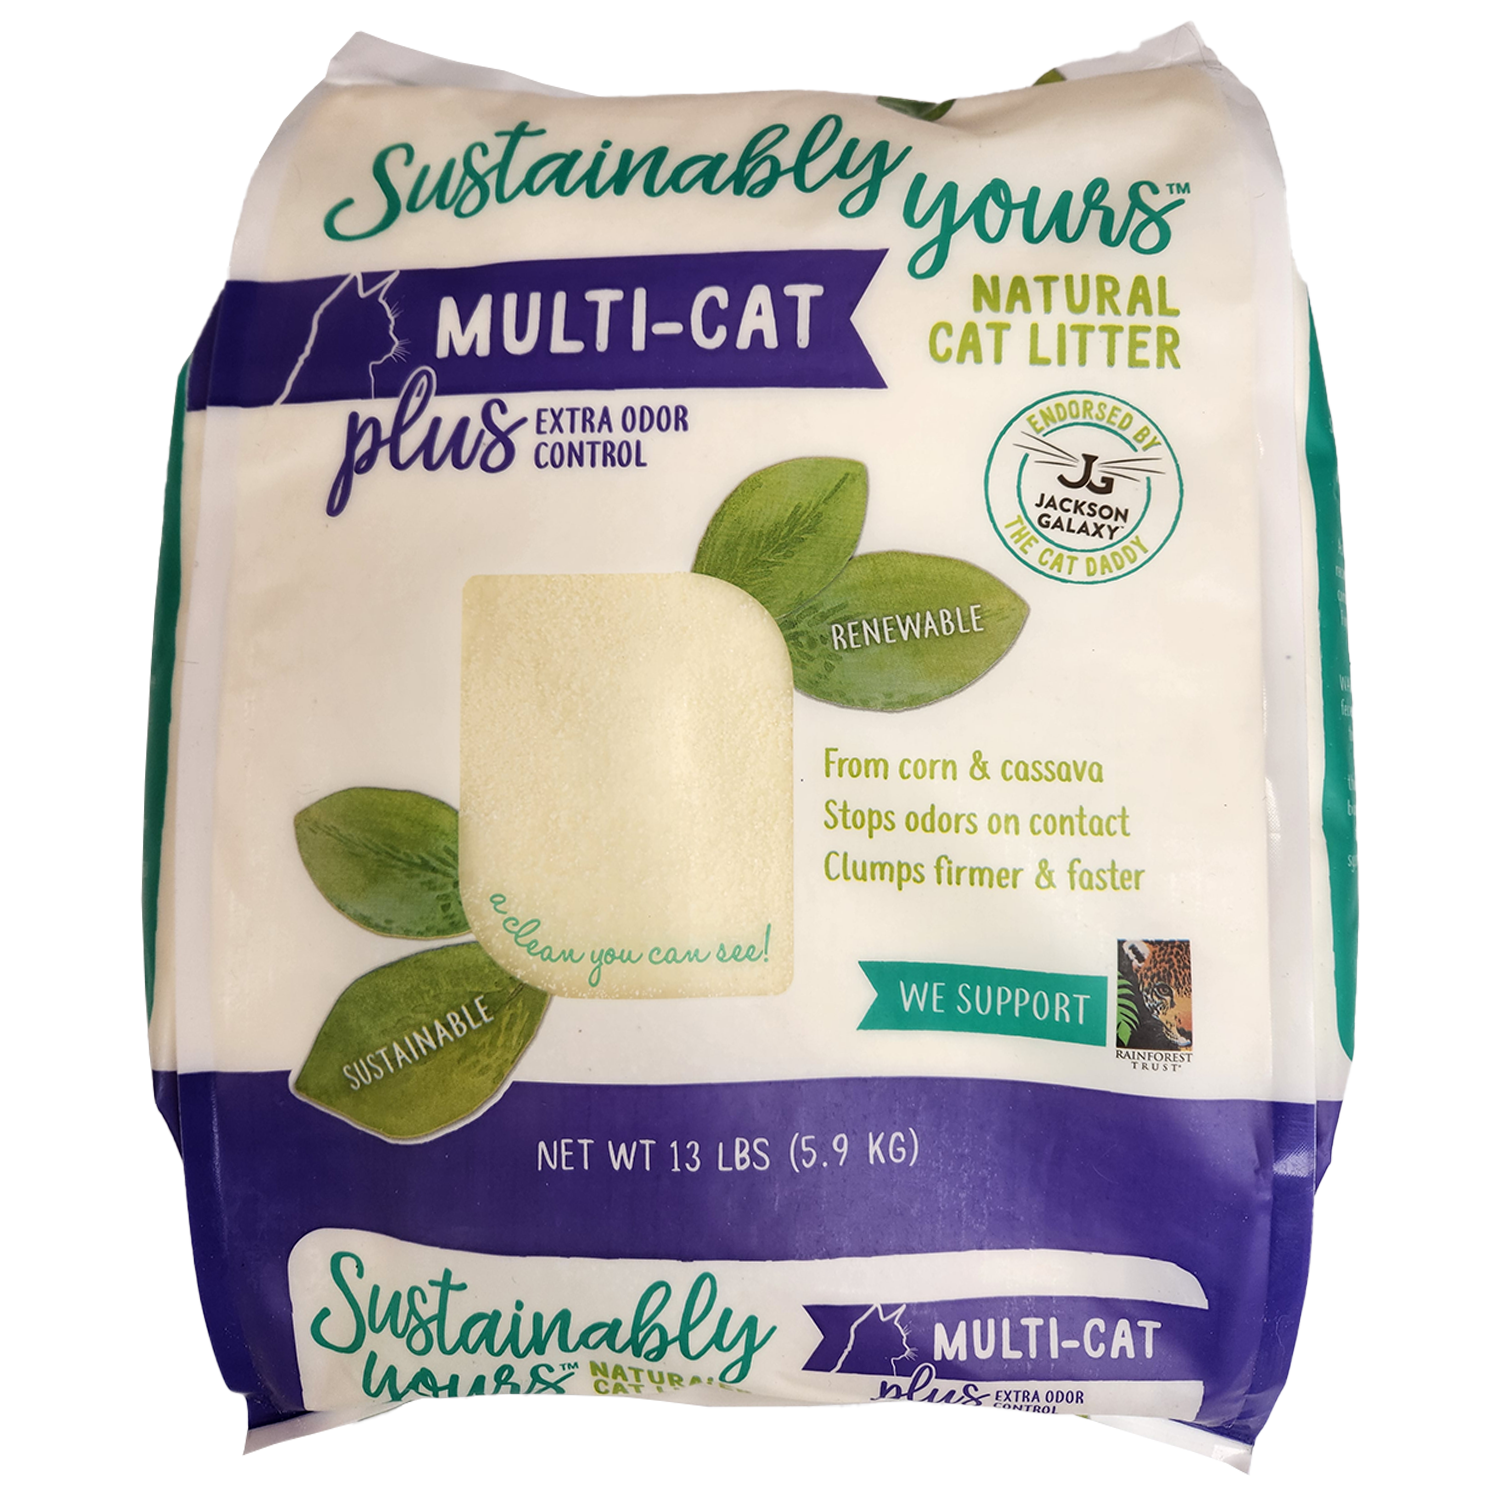 Sustainably Yours Multi-Cat Plus, Extra Odor Control, Natural Cat Litter, 5.9kg